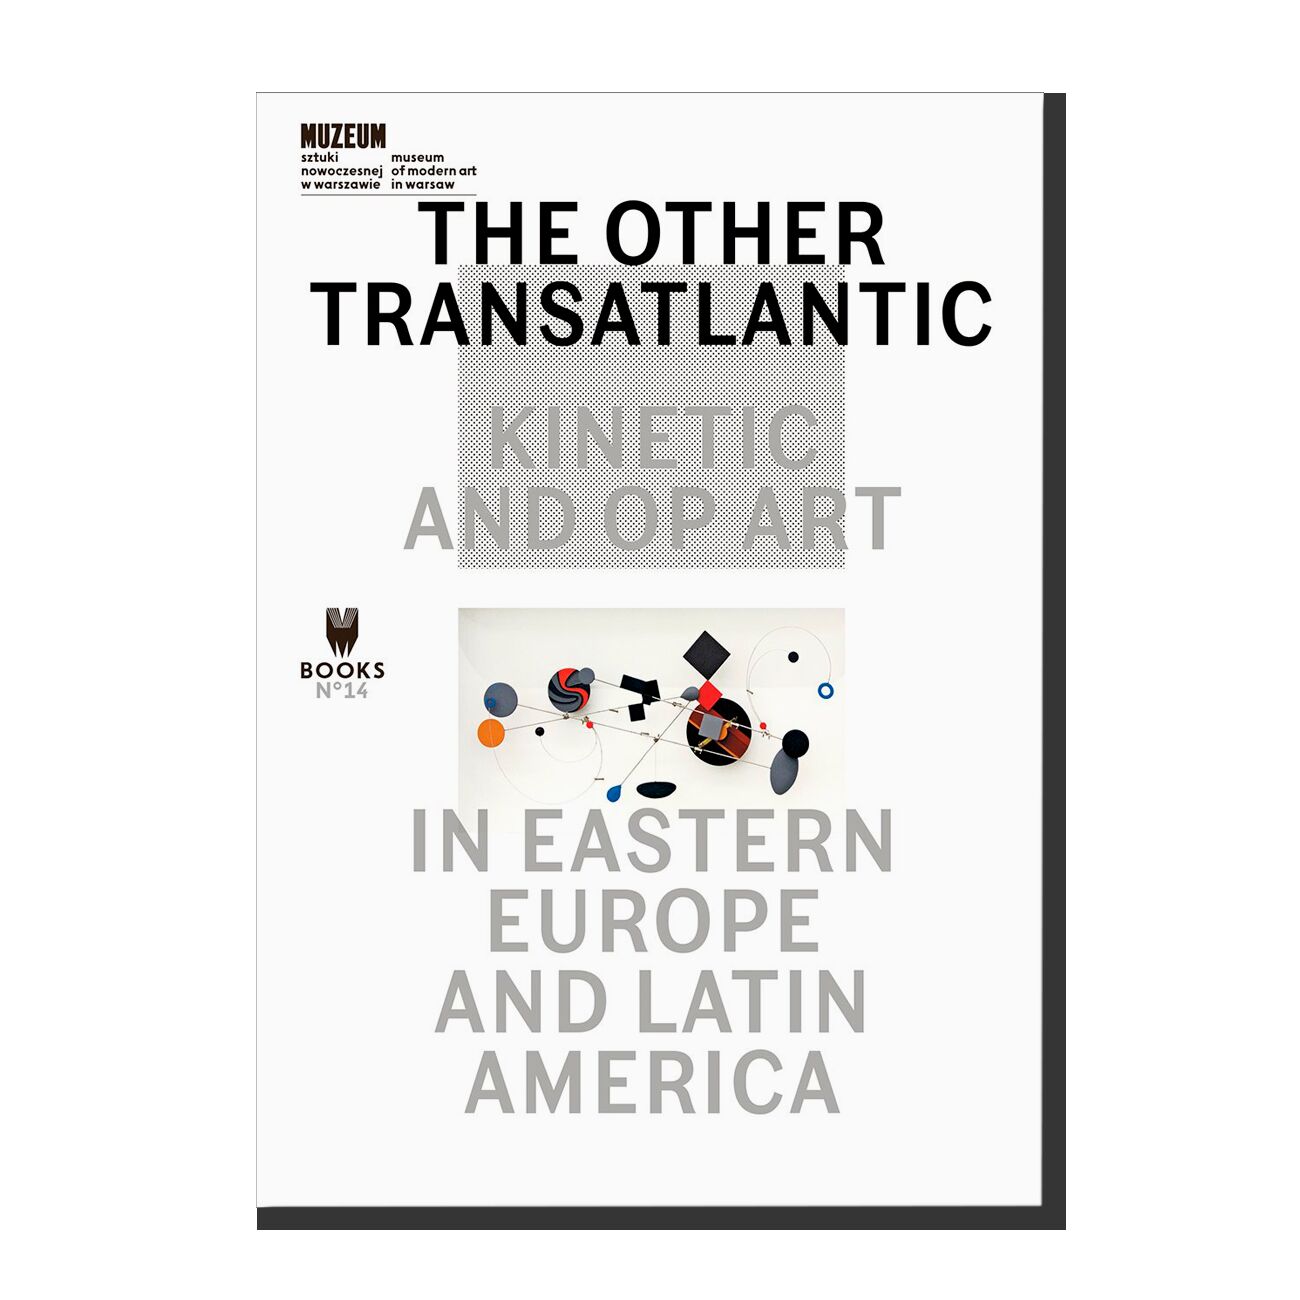 The Other Transatlantic: Kinetic and Op Art in Eastern Europe and Latin America